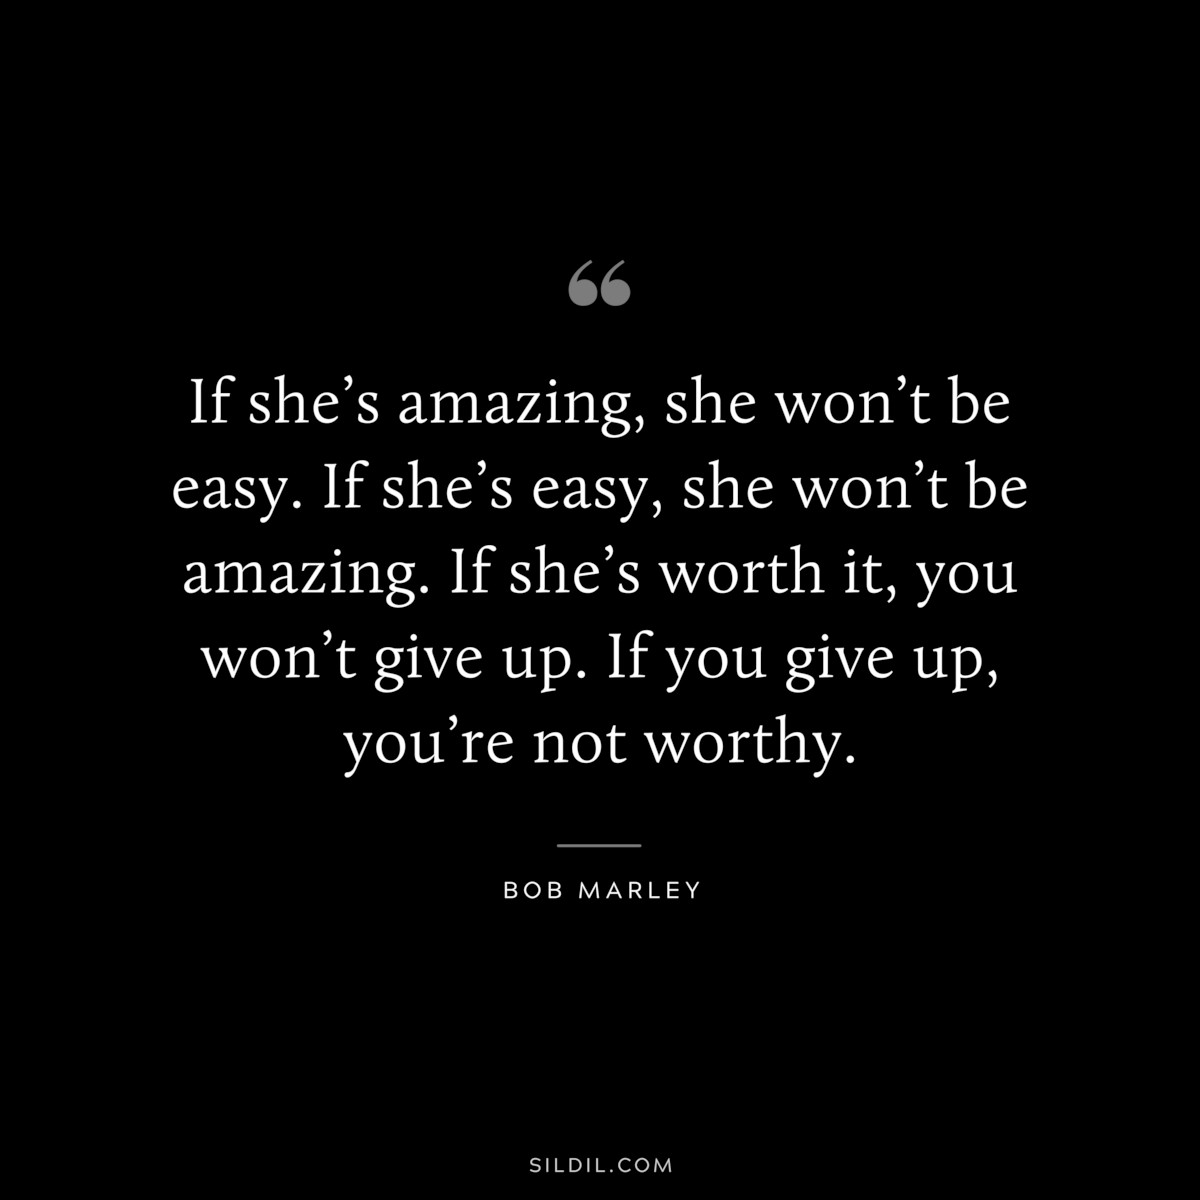 If she’s amazing, she won’t be easy. If she’s easy, she won’t be amazing. If she’s worth it, you won’t give up. If you give up, you’re not worthy. ― Bob Marley